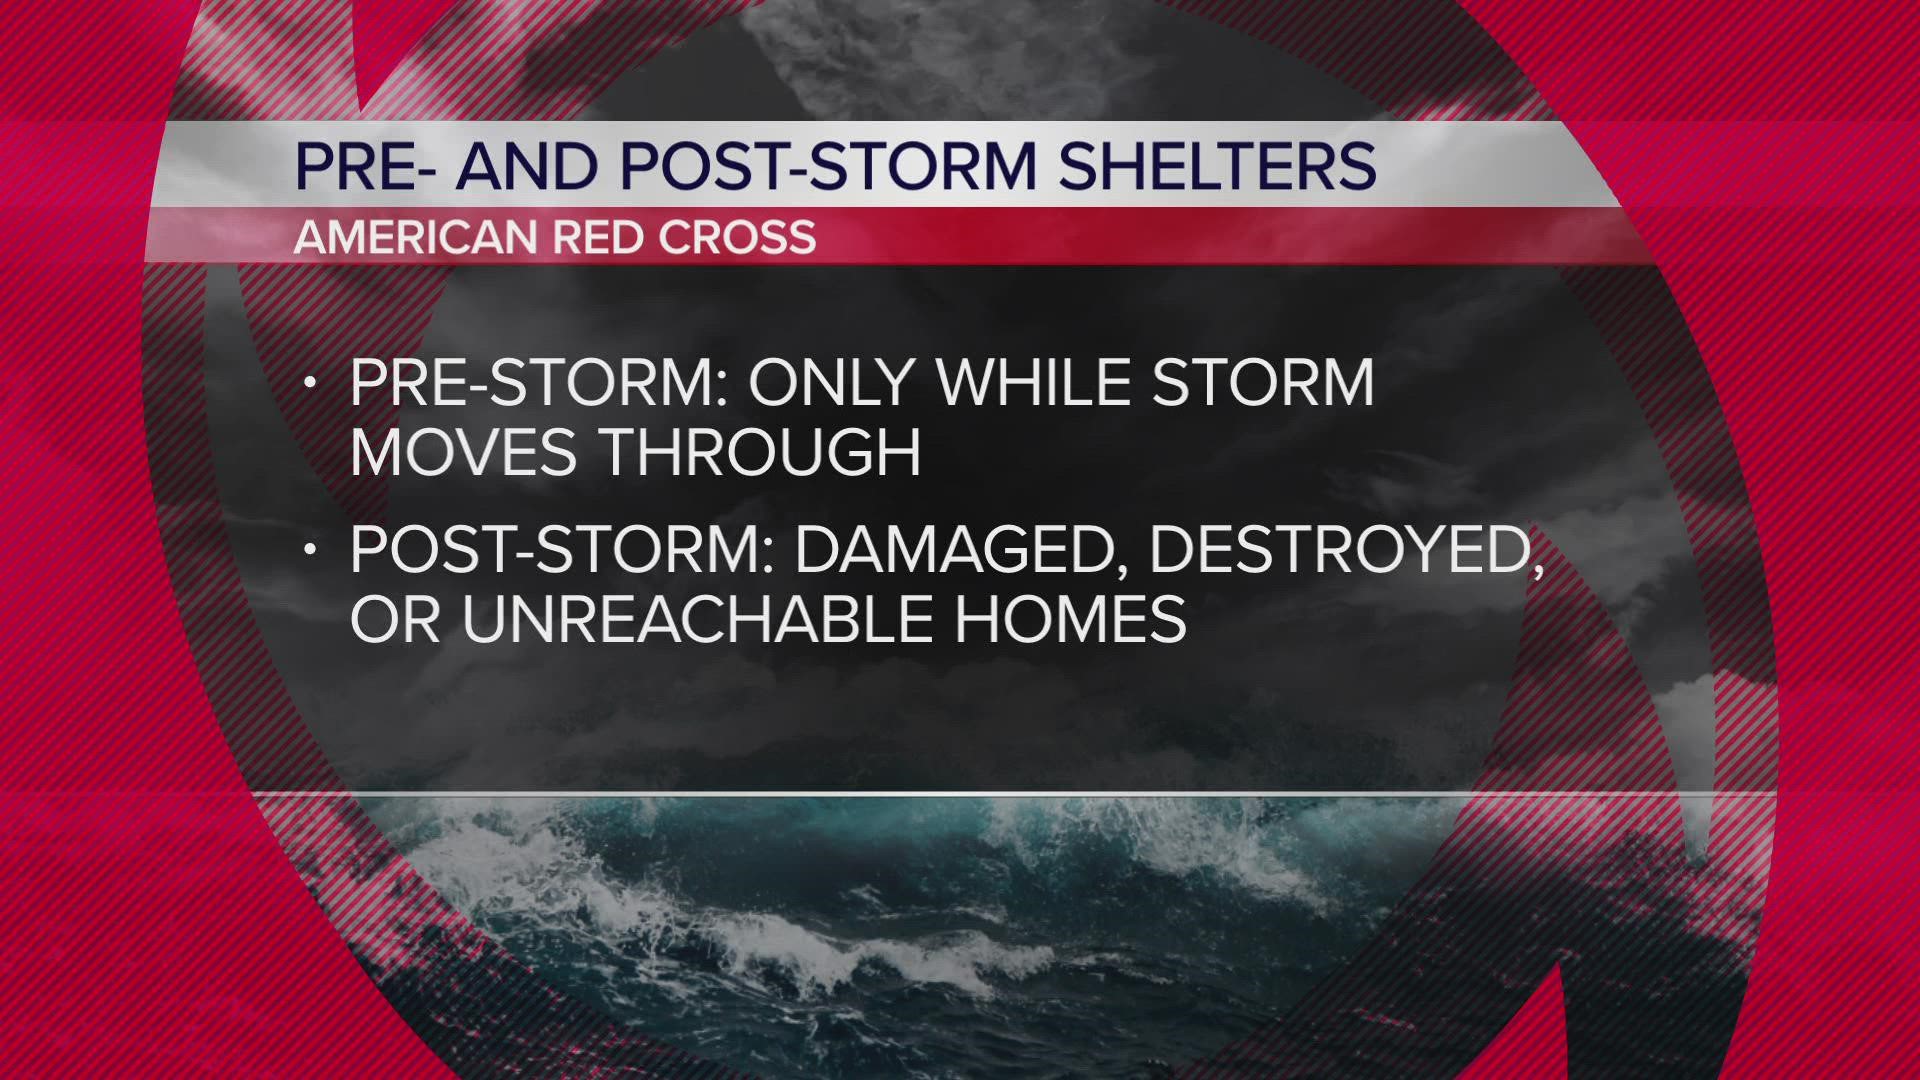 There are different types of shelters that are in place for residents who are about to be impacted by a hurricane - and after.